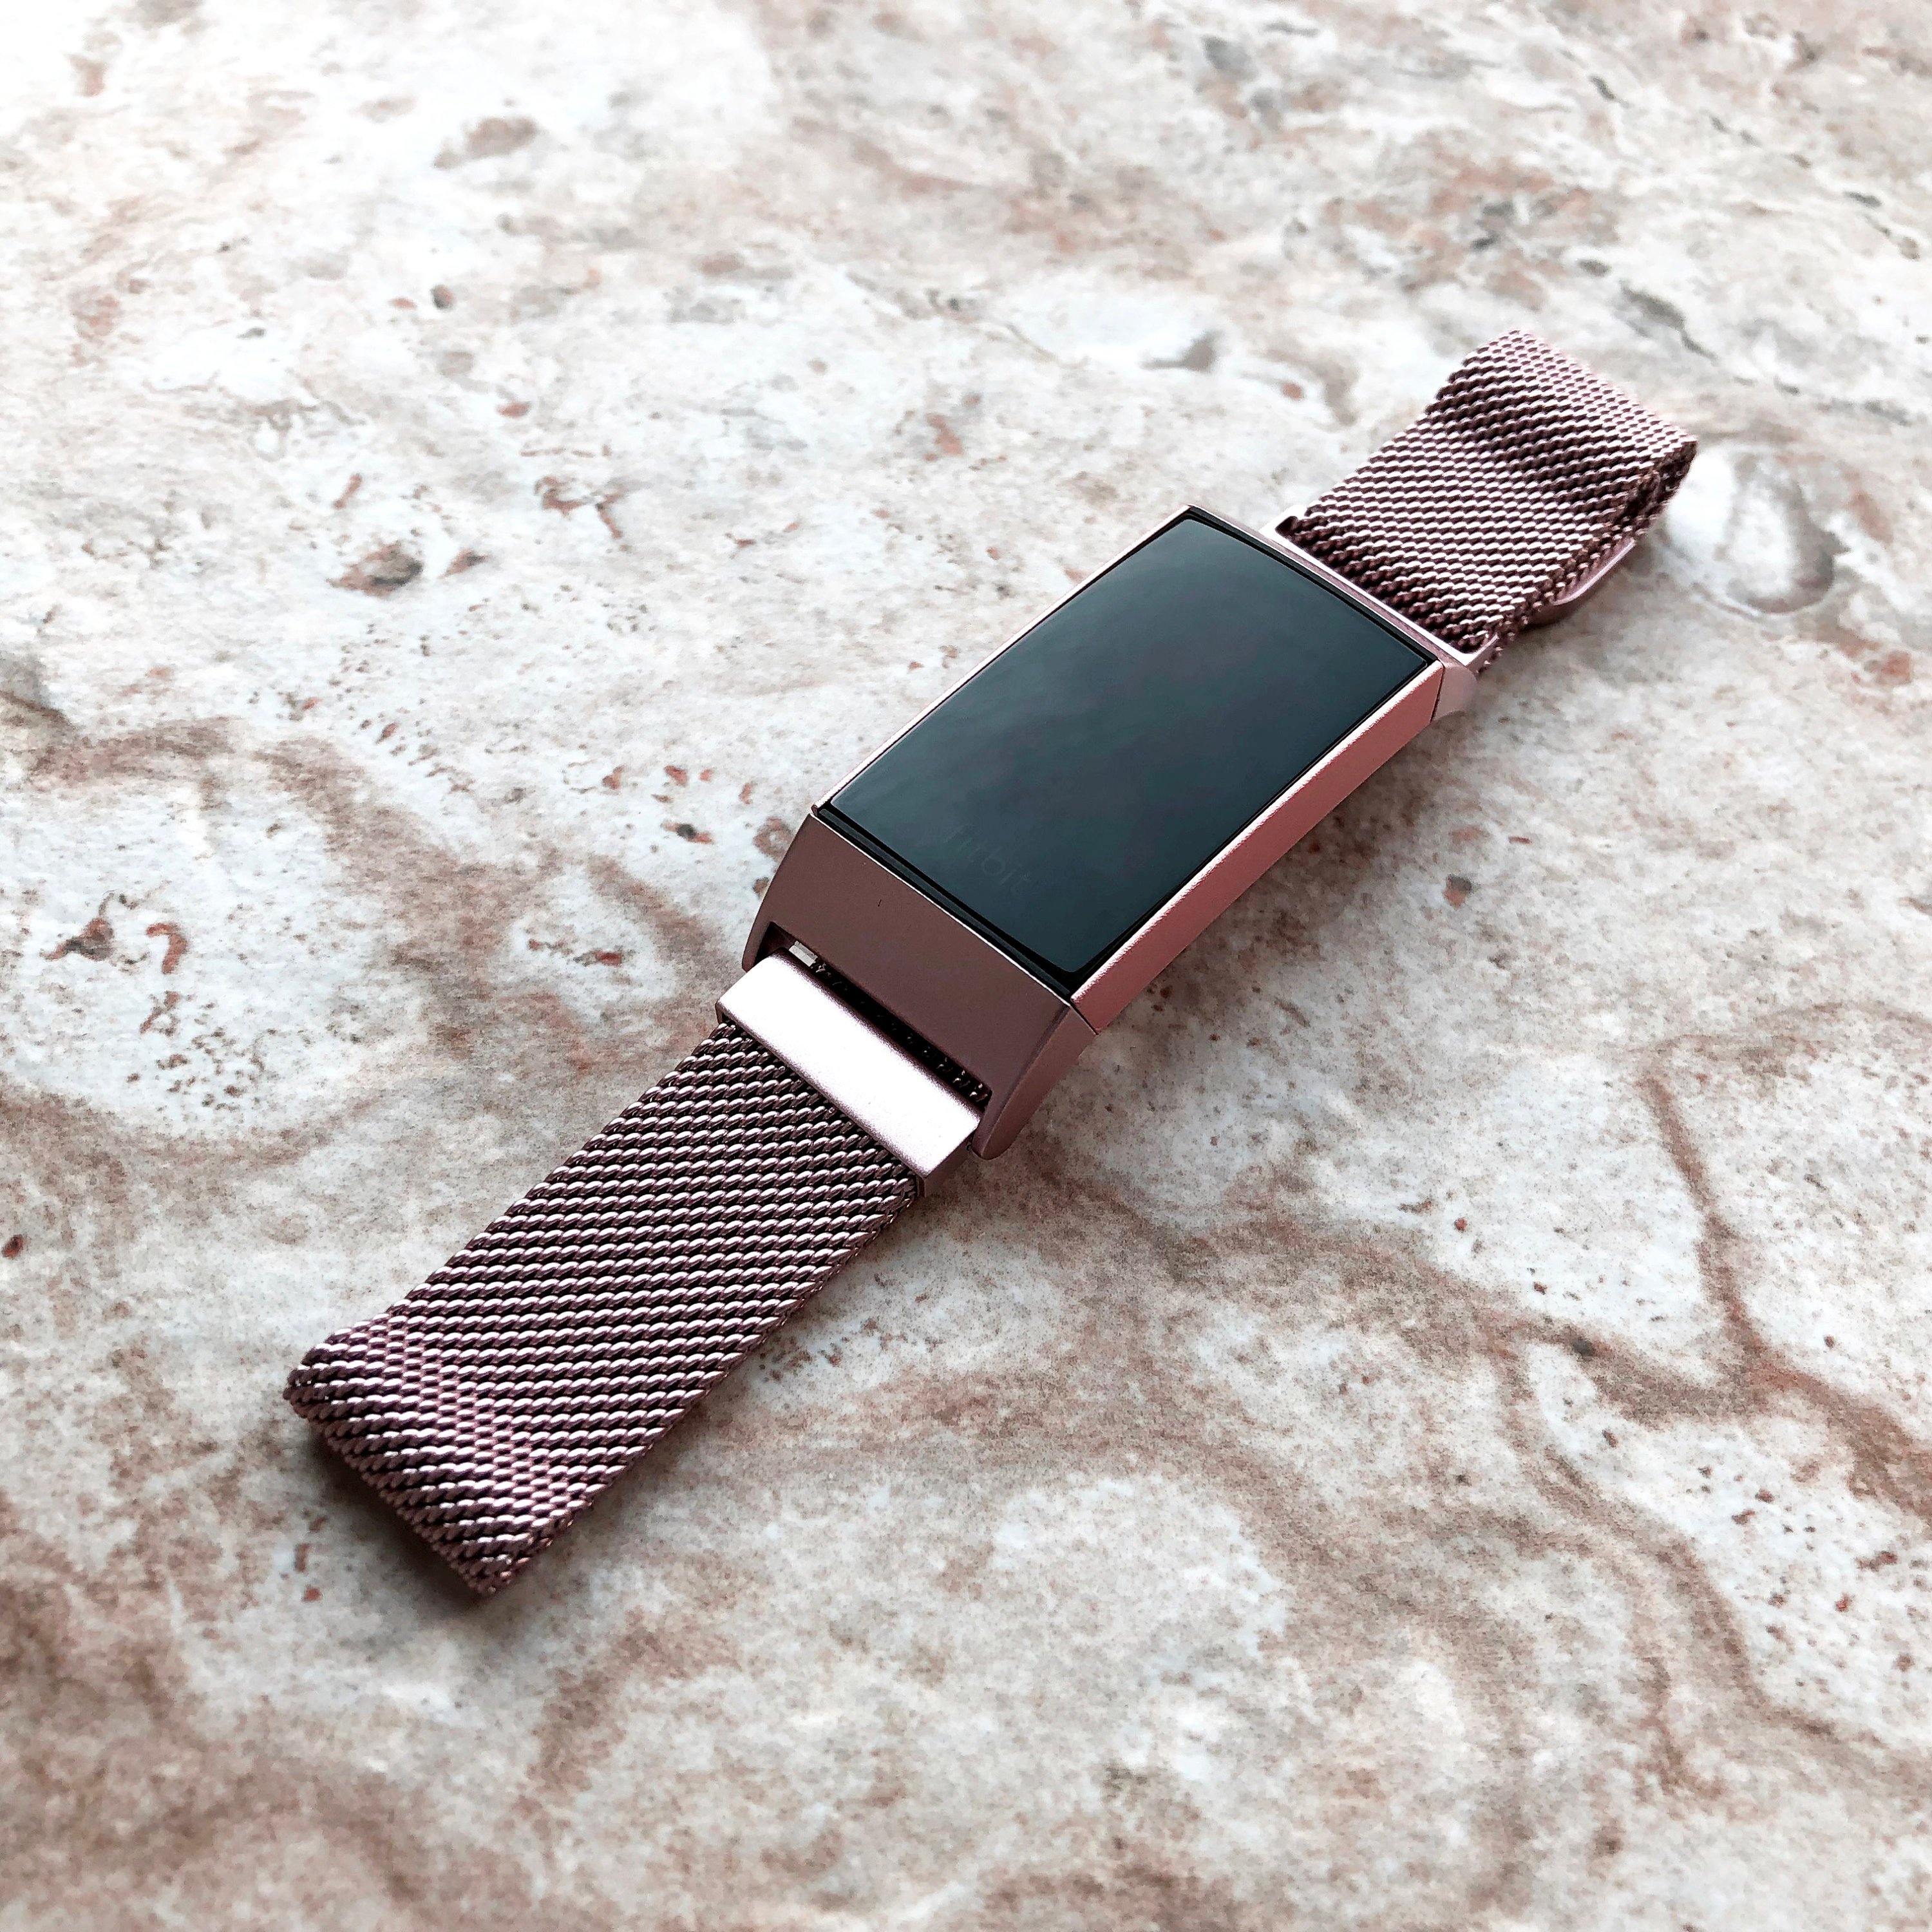 fitbit charge 3 rose gold band